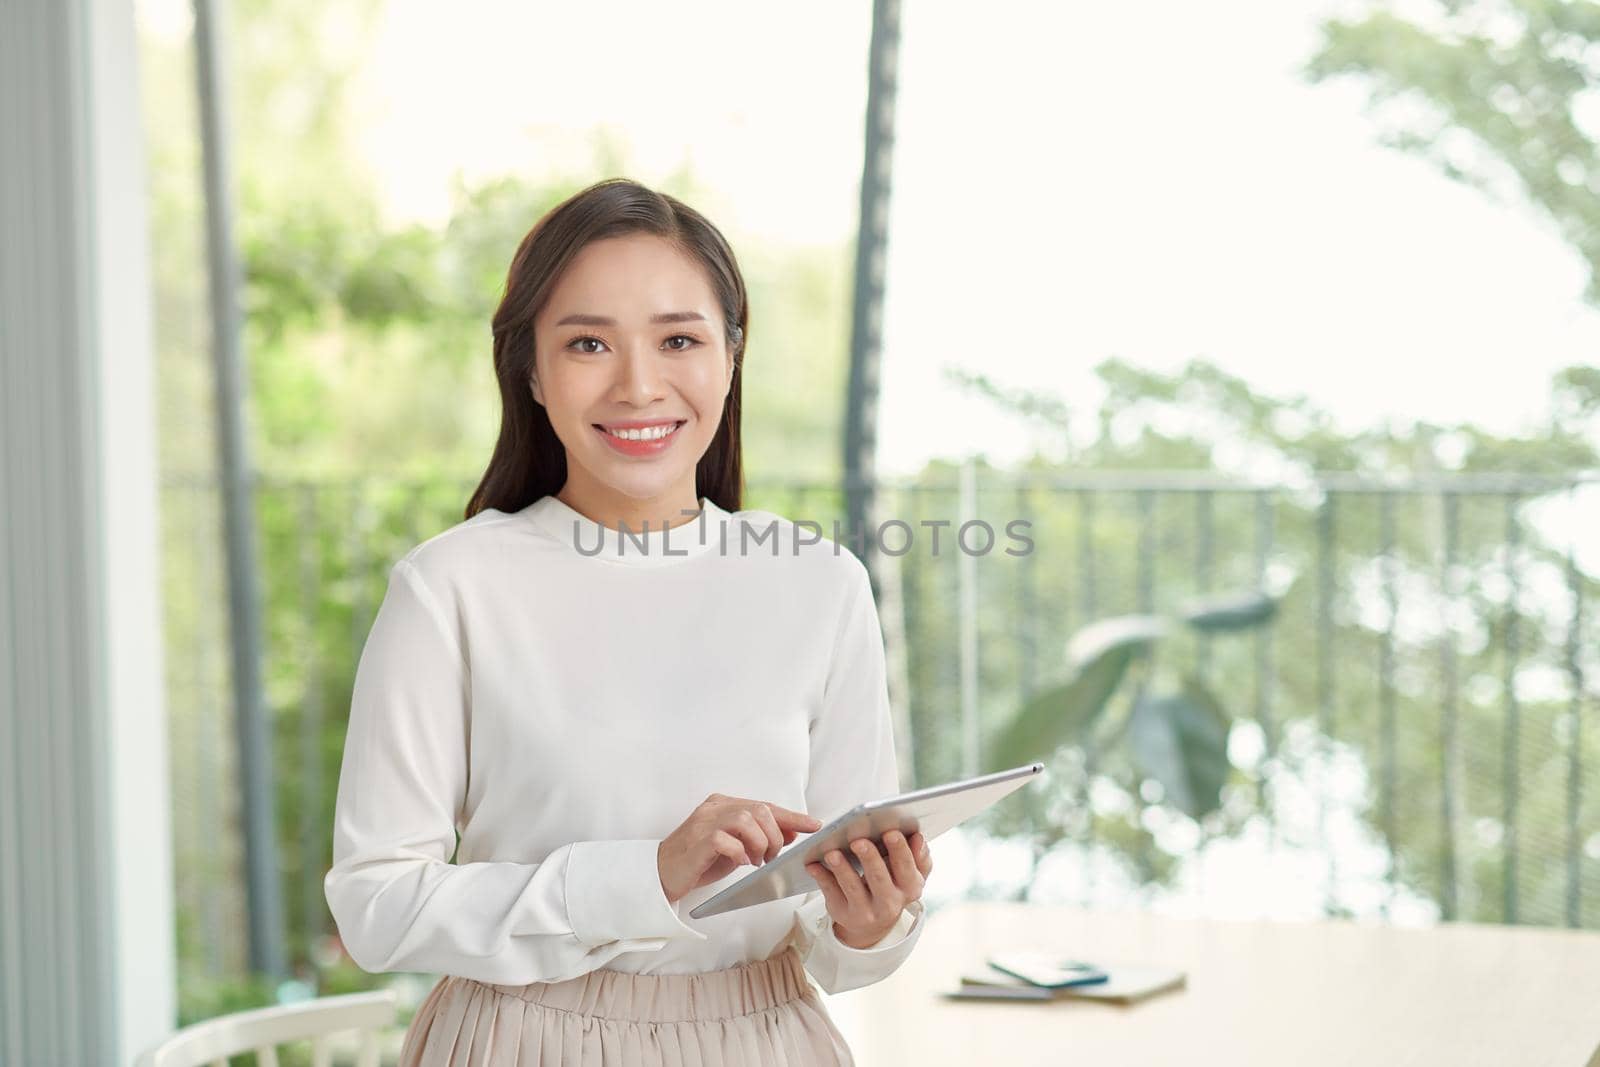 Attractive businesswoman using a digital tablet while standing in front of windows in an office building